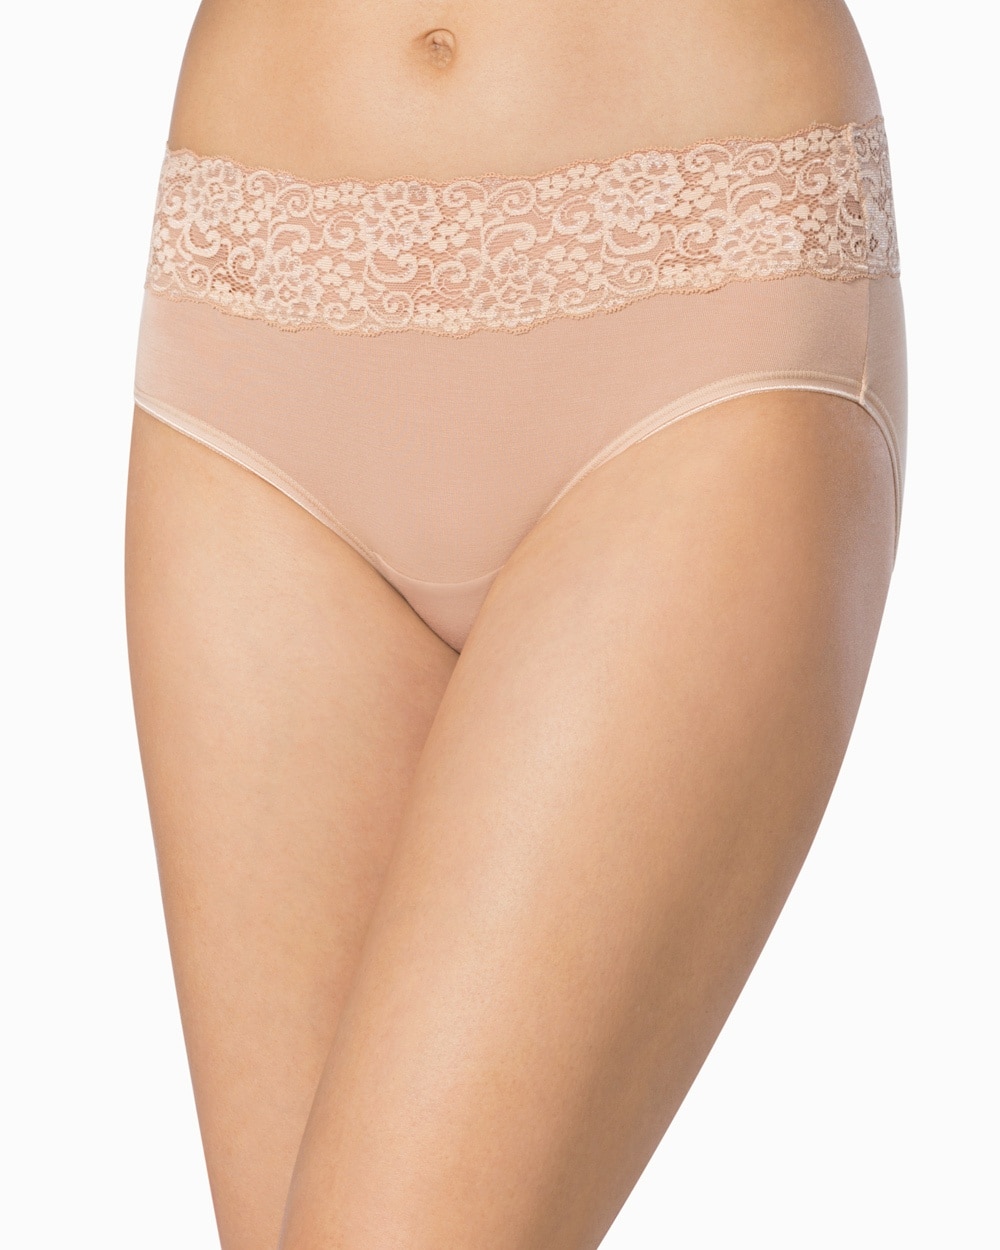 Soma, Intimates & Sleepwear, Soma Embraceable Full Coverage Wireless  Unlined Bra Soft Tan 4d